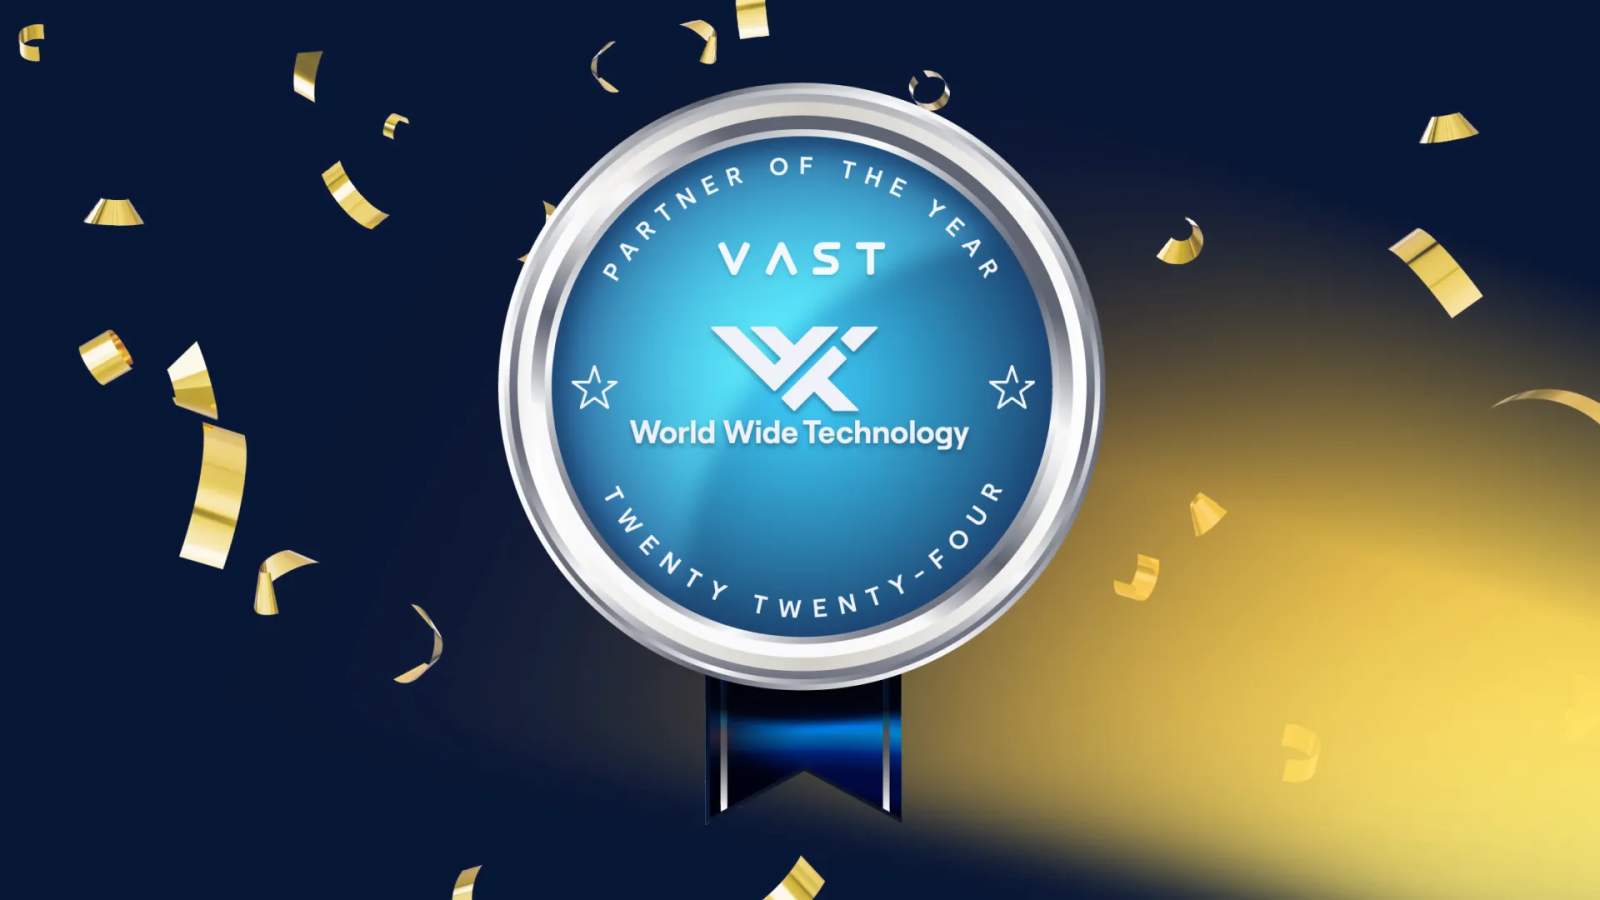 World Wide Technology Named VAST Partner of the Year